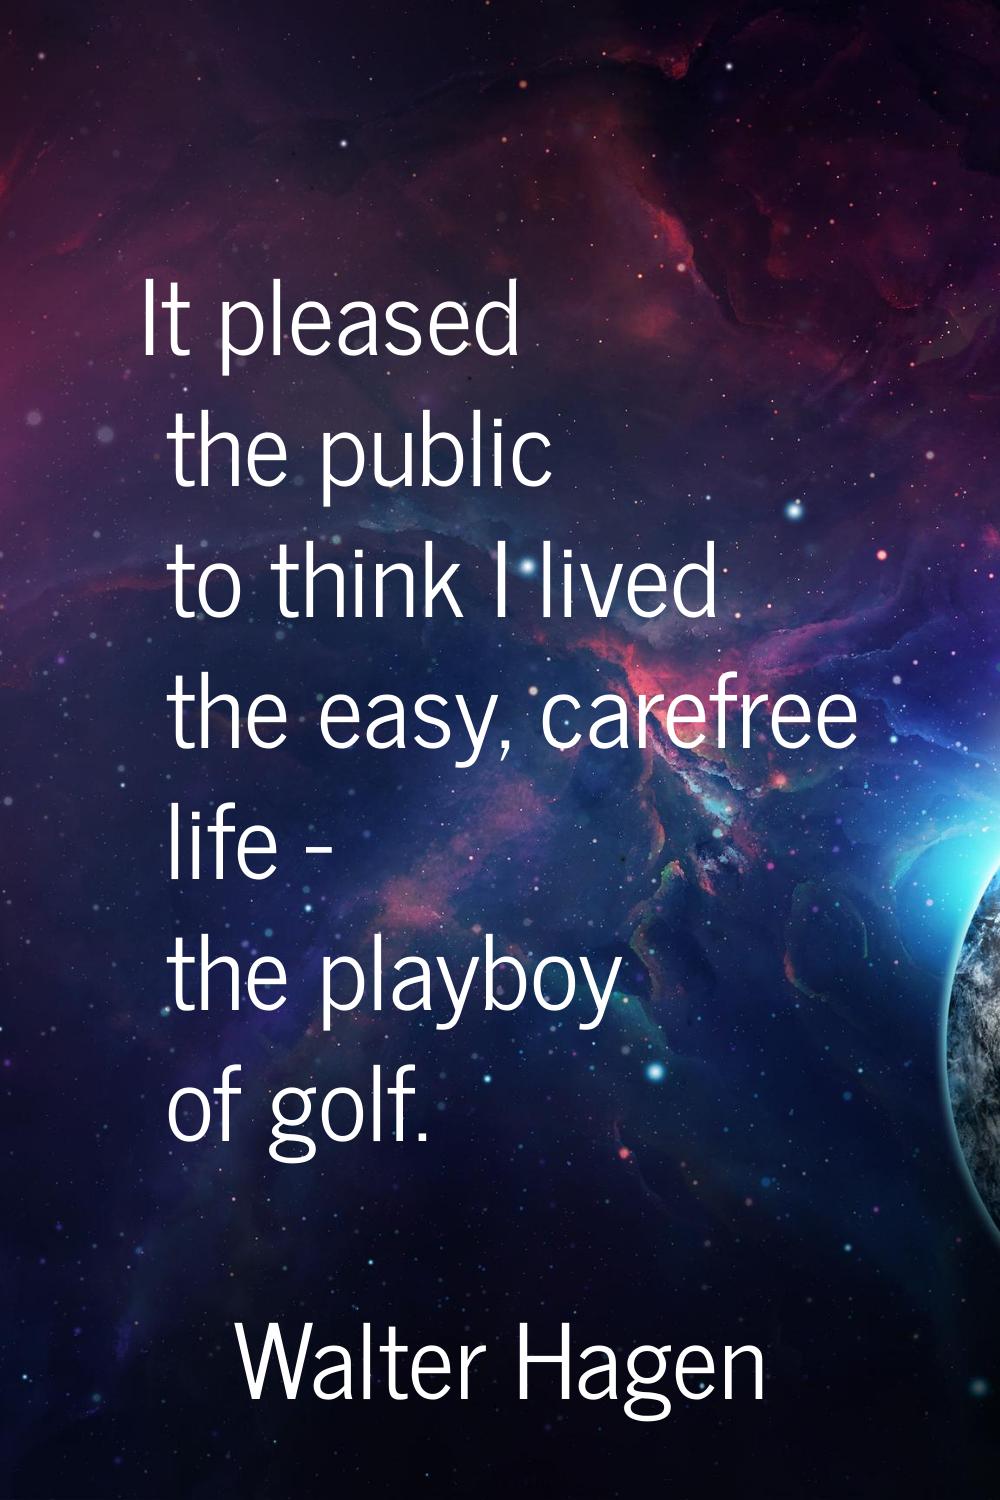 It pleased the public to think I lived the easy, carefree life - the playboy of golf.